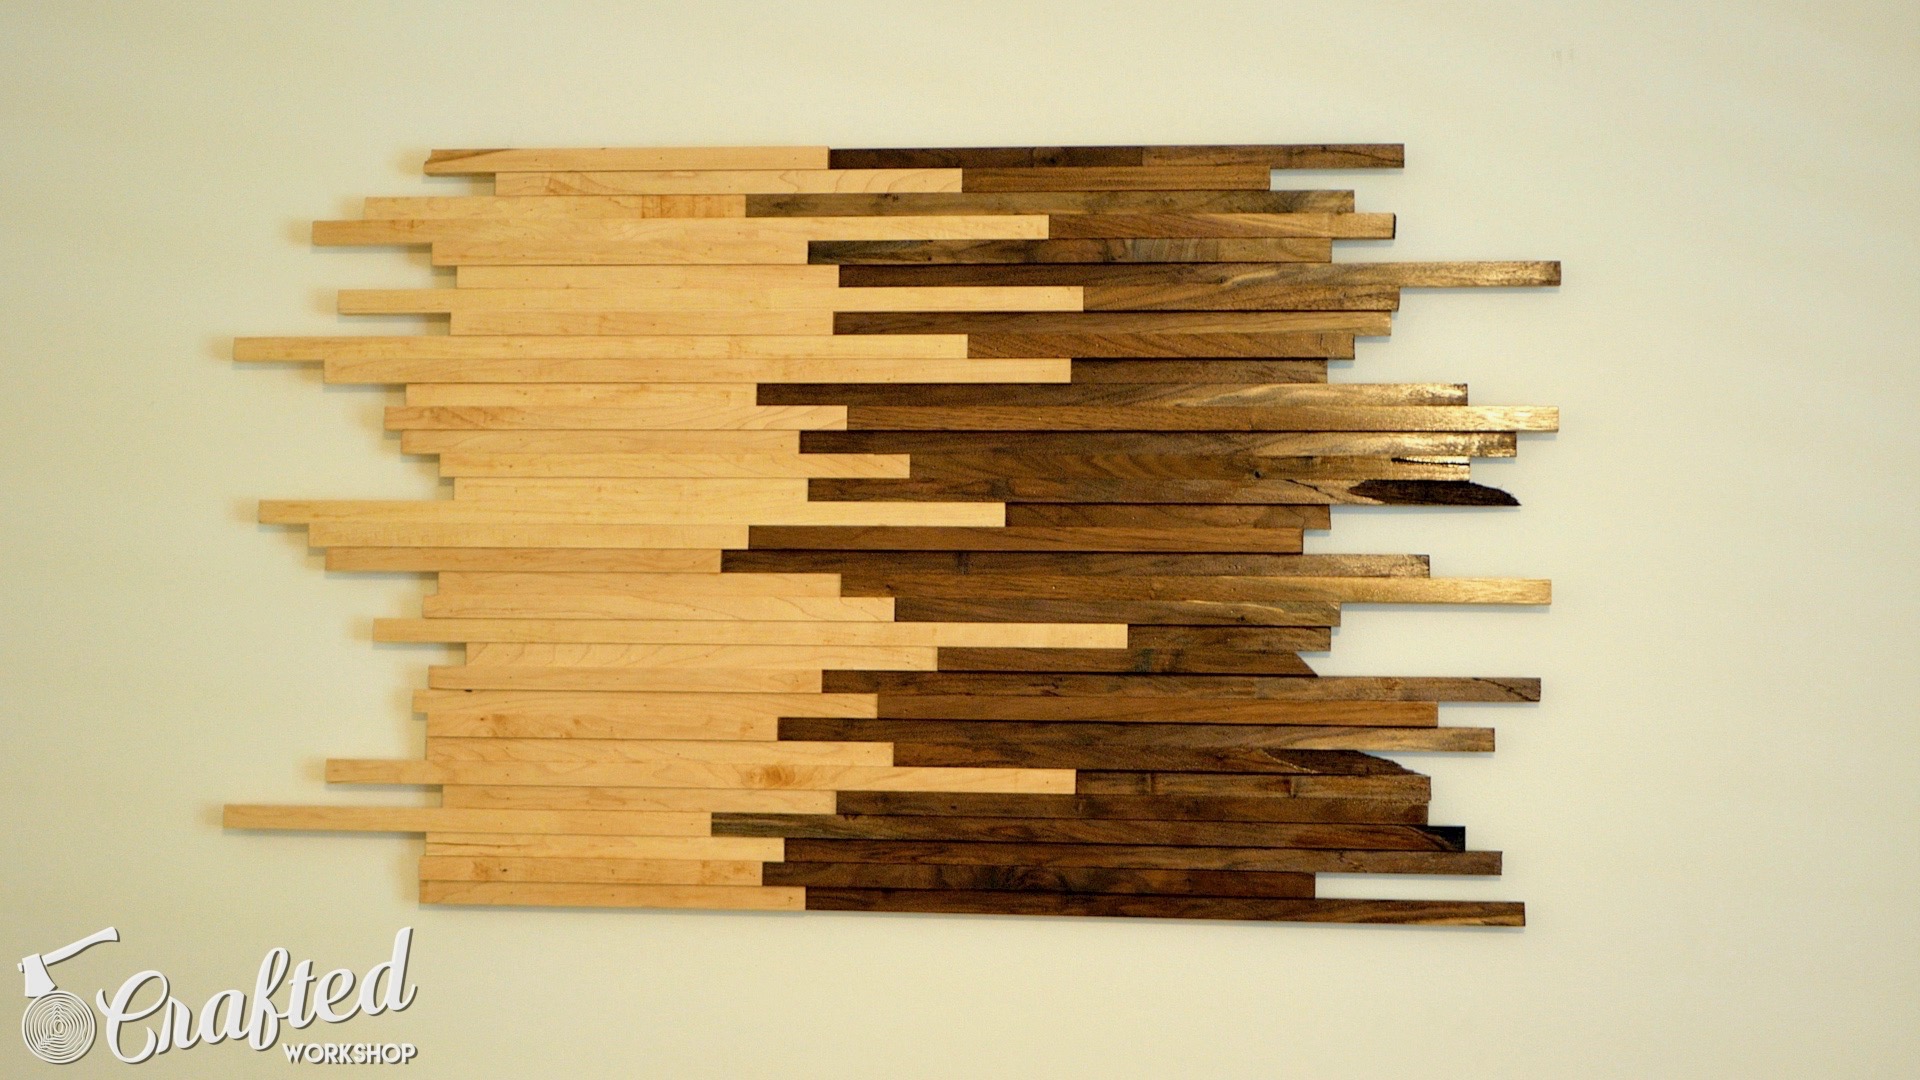 Scrap Wood Wall Art Made From Walnut & Maple | How To Build - Woodworking - 13.jpg